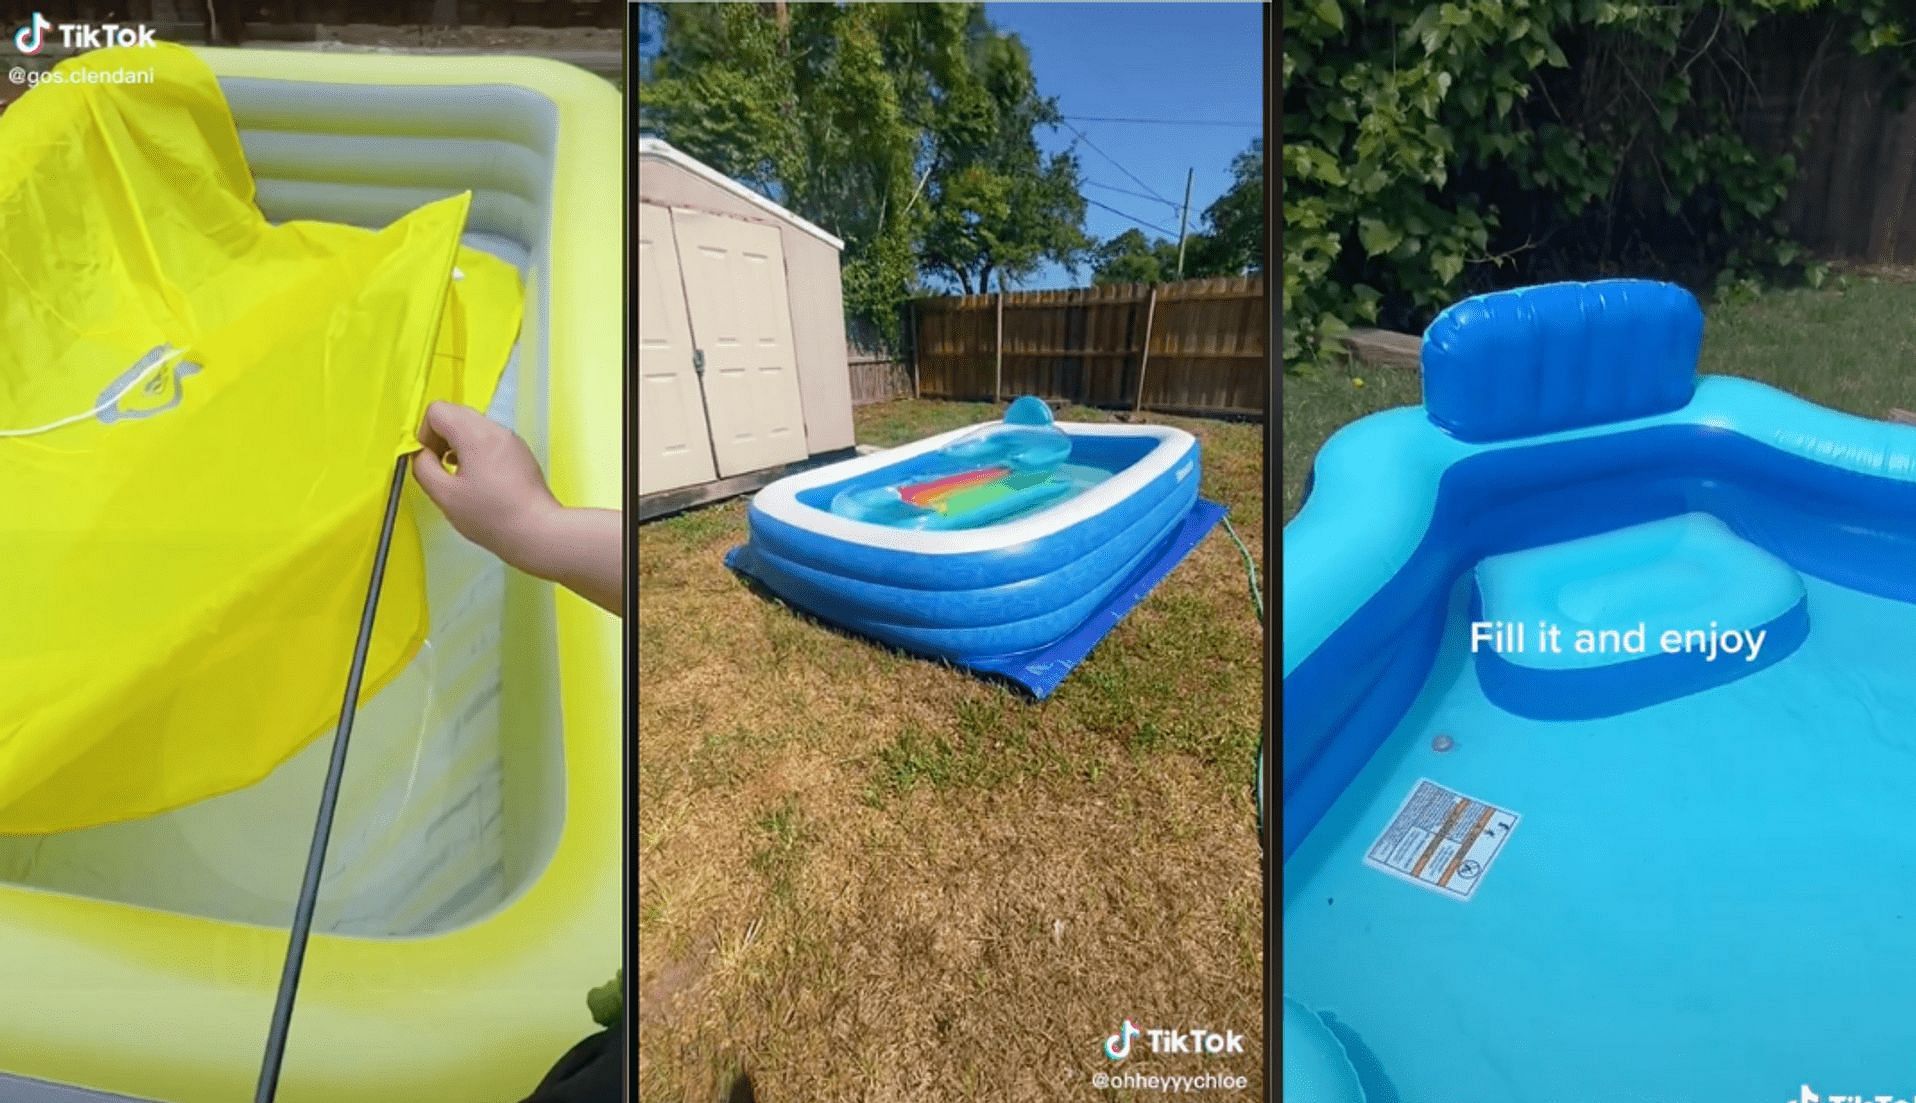 The inflatable pool is the new &#039;TikTok made me by this&#039; product; where to get it &amp; more details. (Images via TikTok)